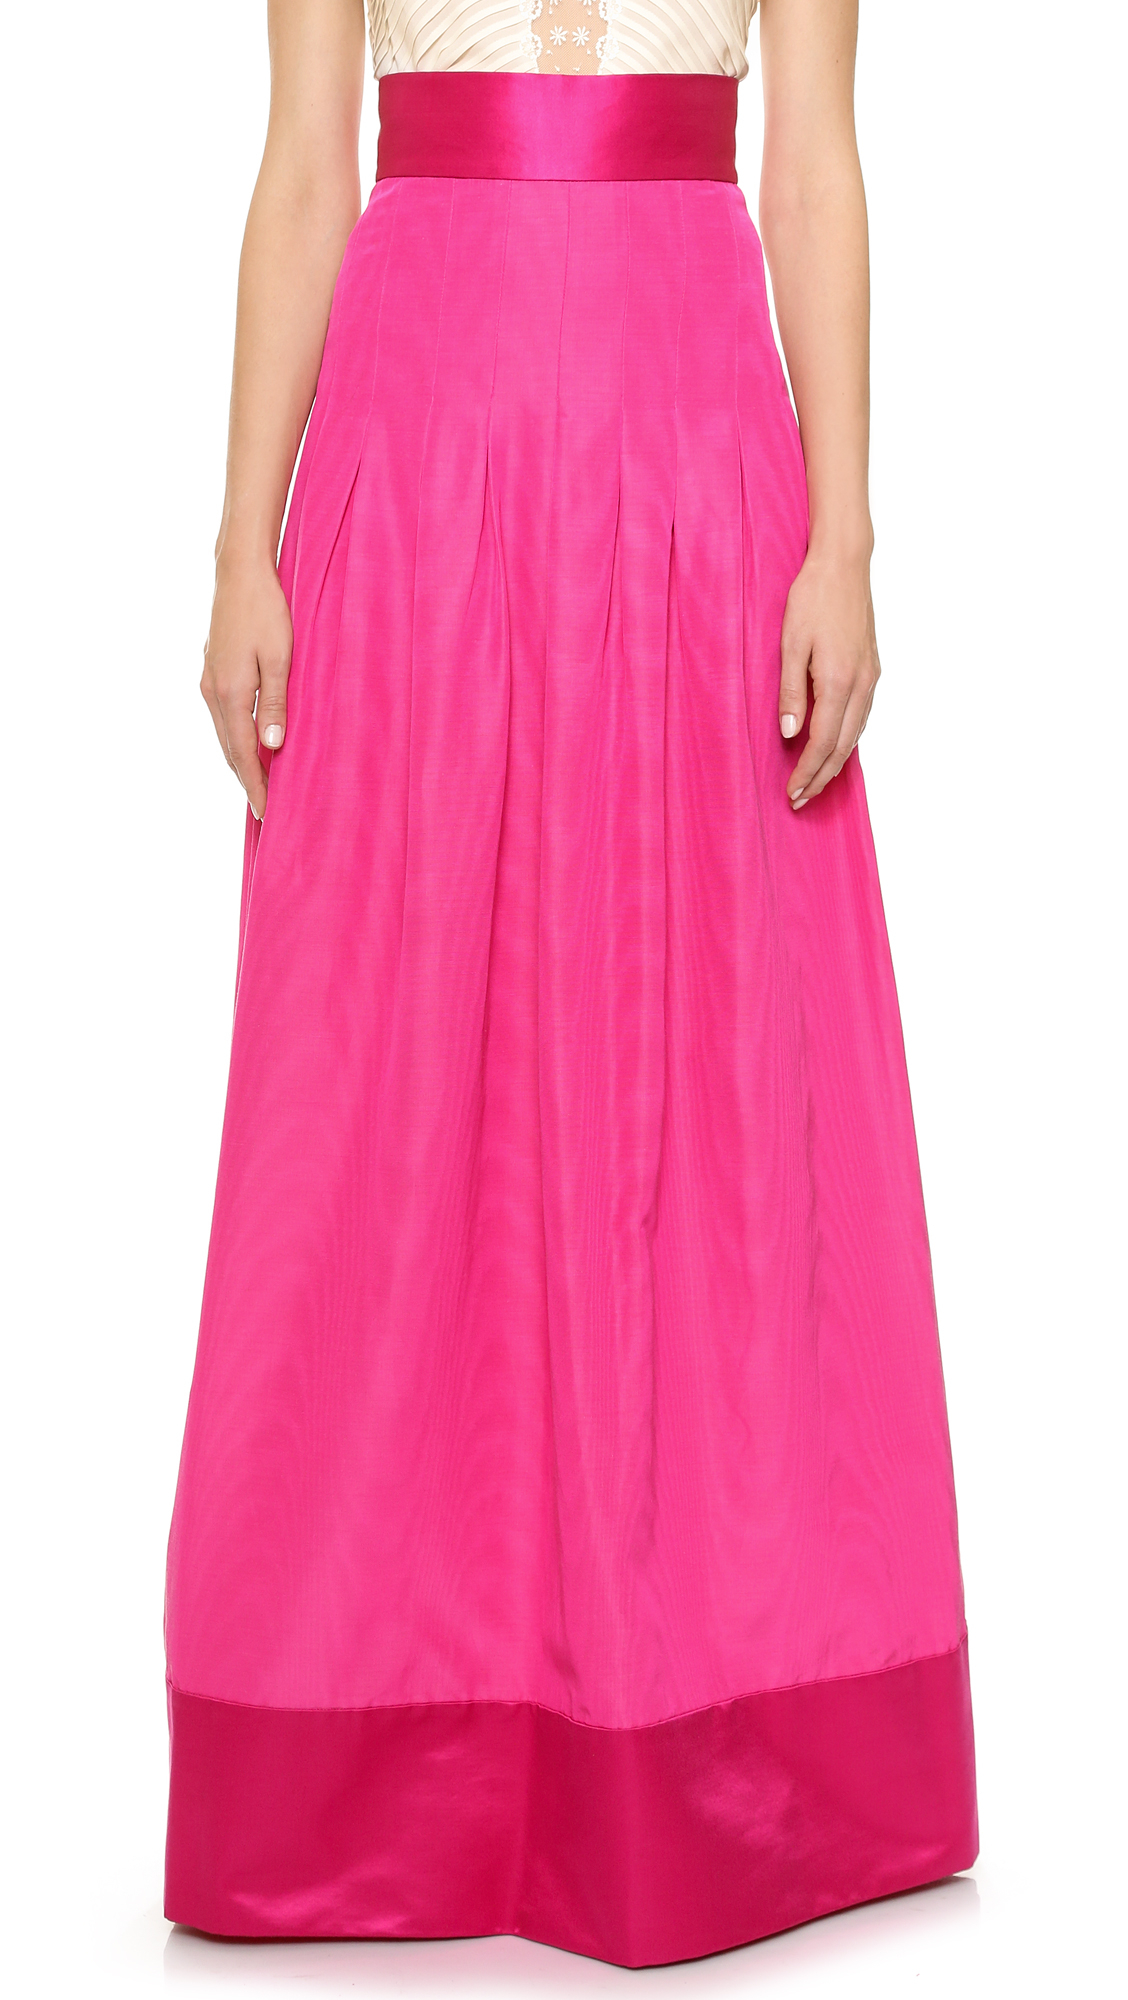 Lyst - Temperley London Long Palais Skirt - Bright Pink in Pink